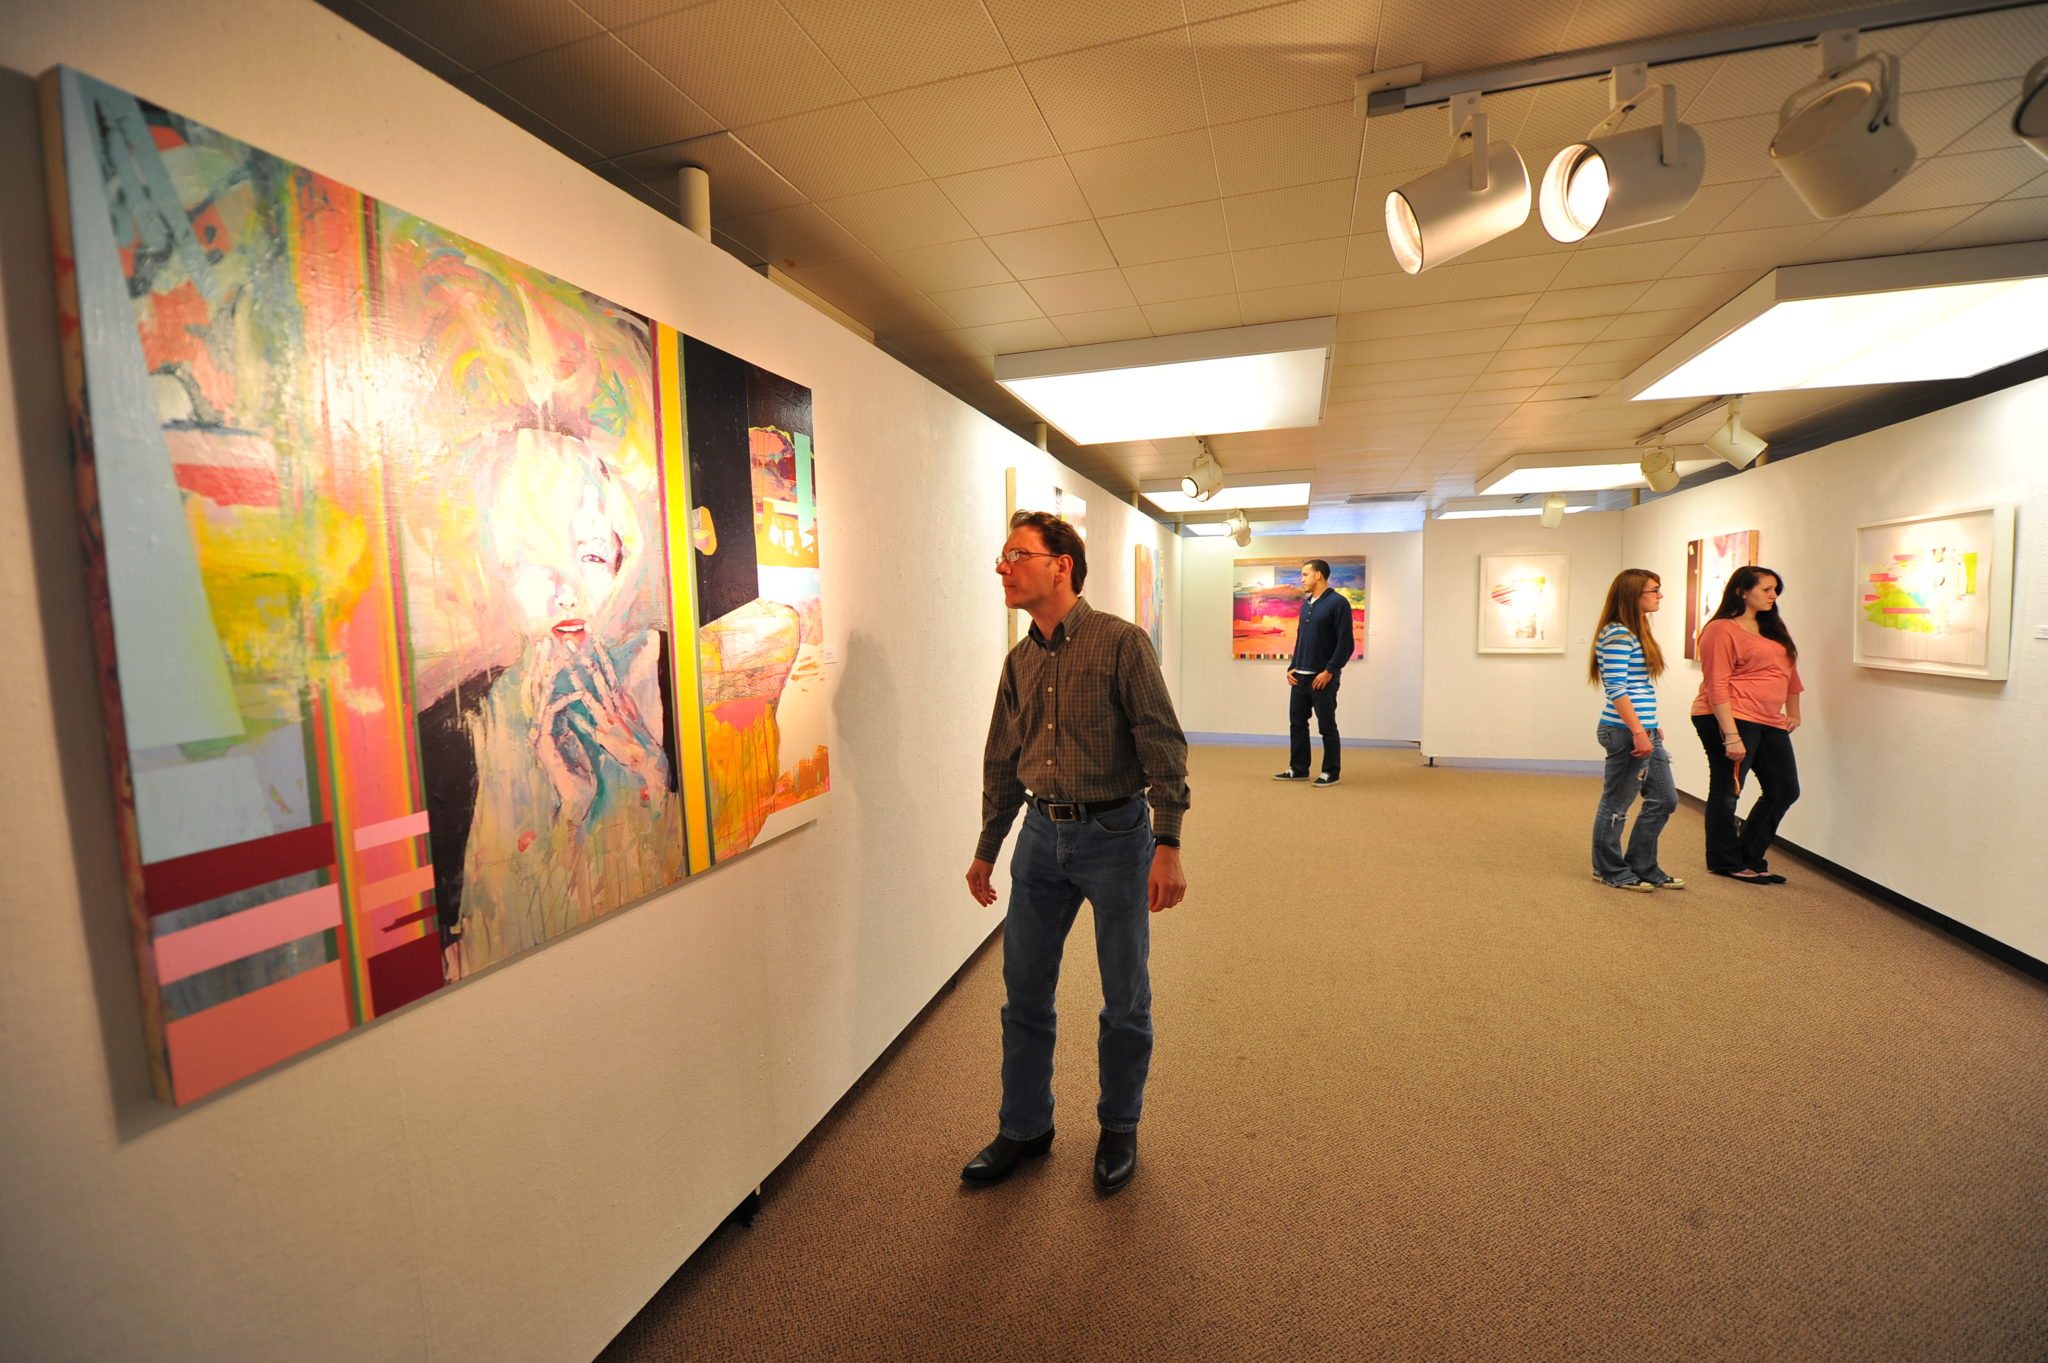 Visitors look at artwork in the Linder Gallery at Keystone College